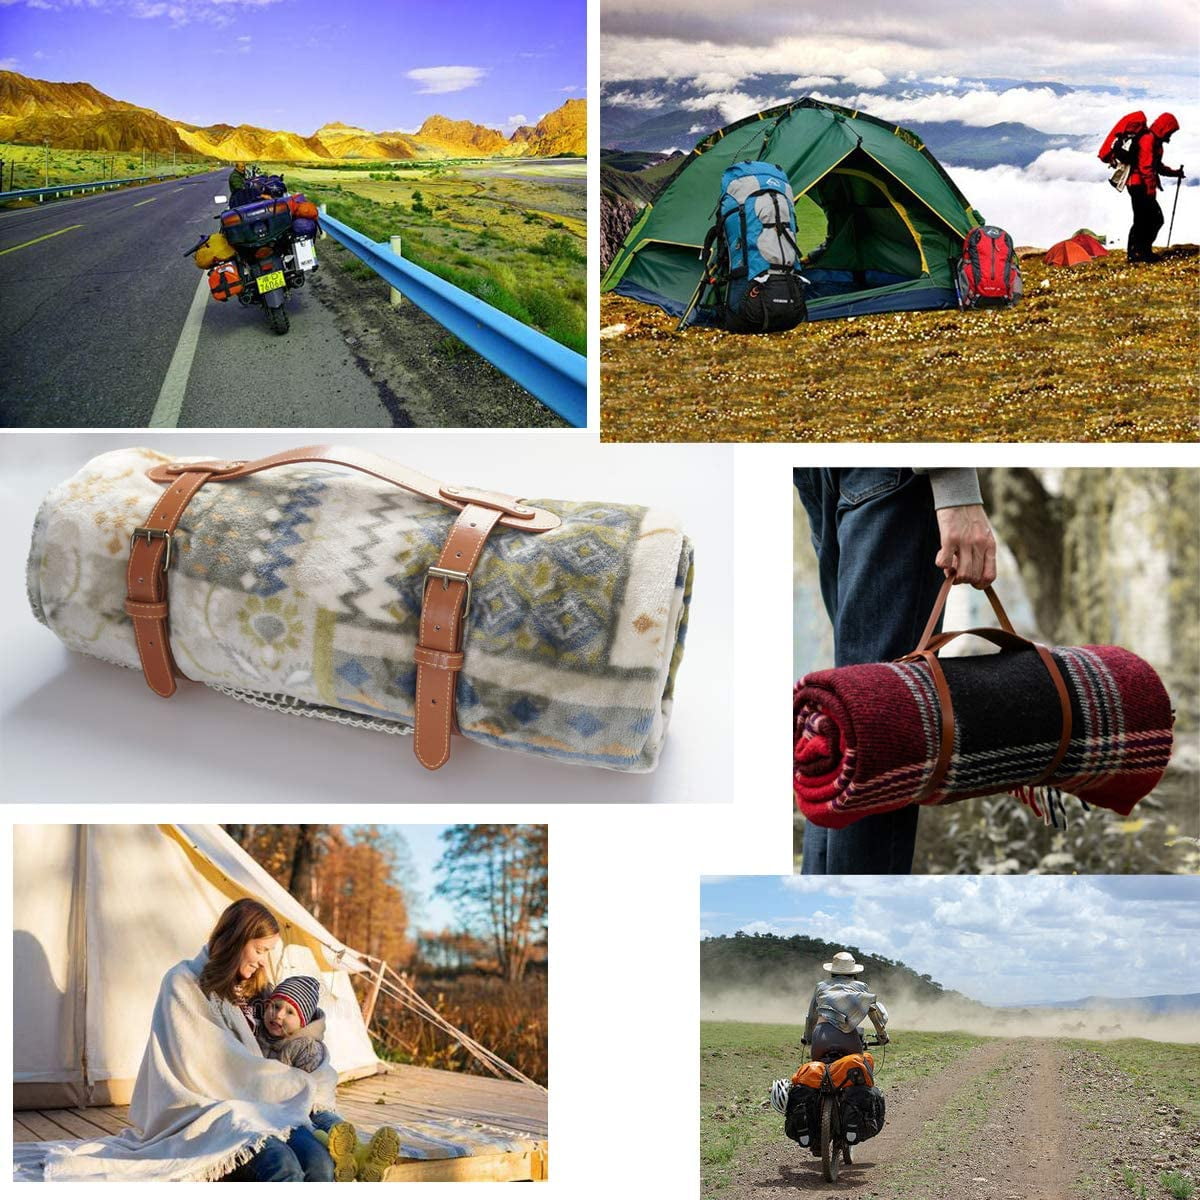 Picnics Black Outdoor Motorcycle Bedroll Blanket Straps Festivals Portable Lightweight Picnic Blanket Carry Strap for Camping Dengofng PU Leather Carry Strap 